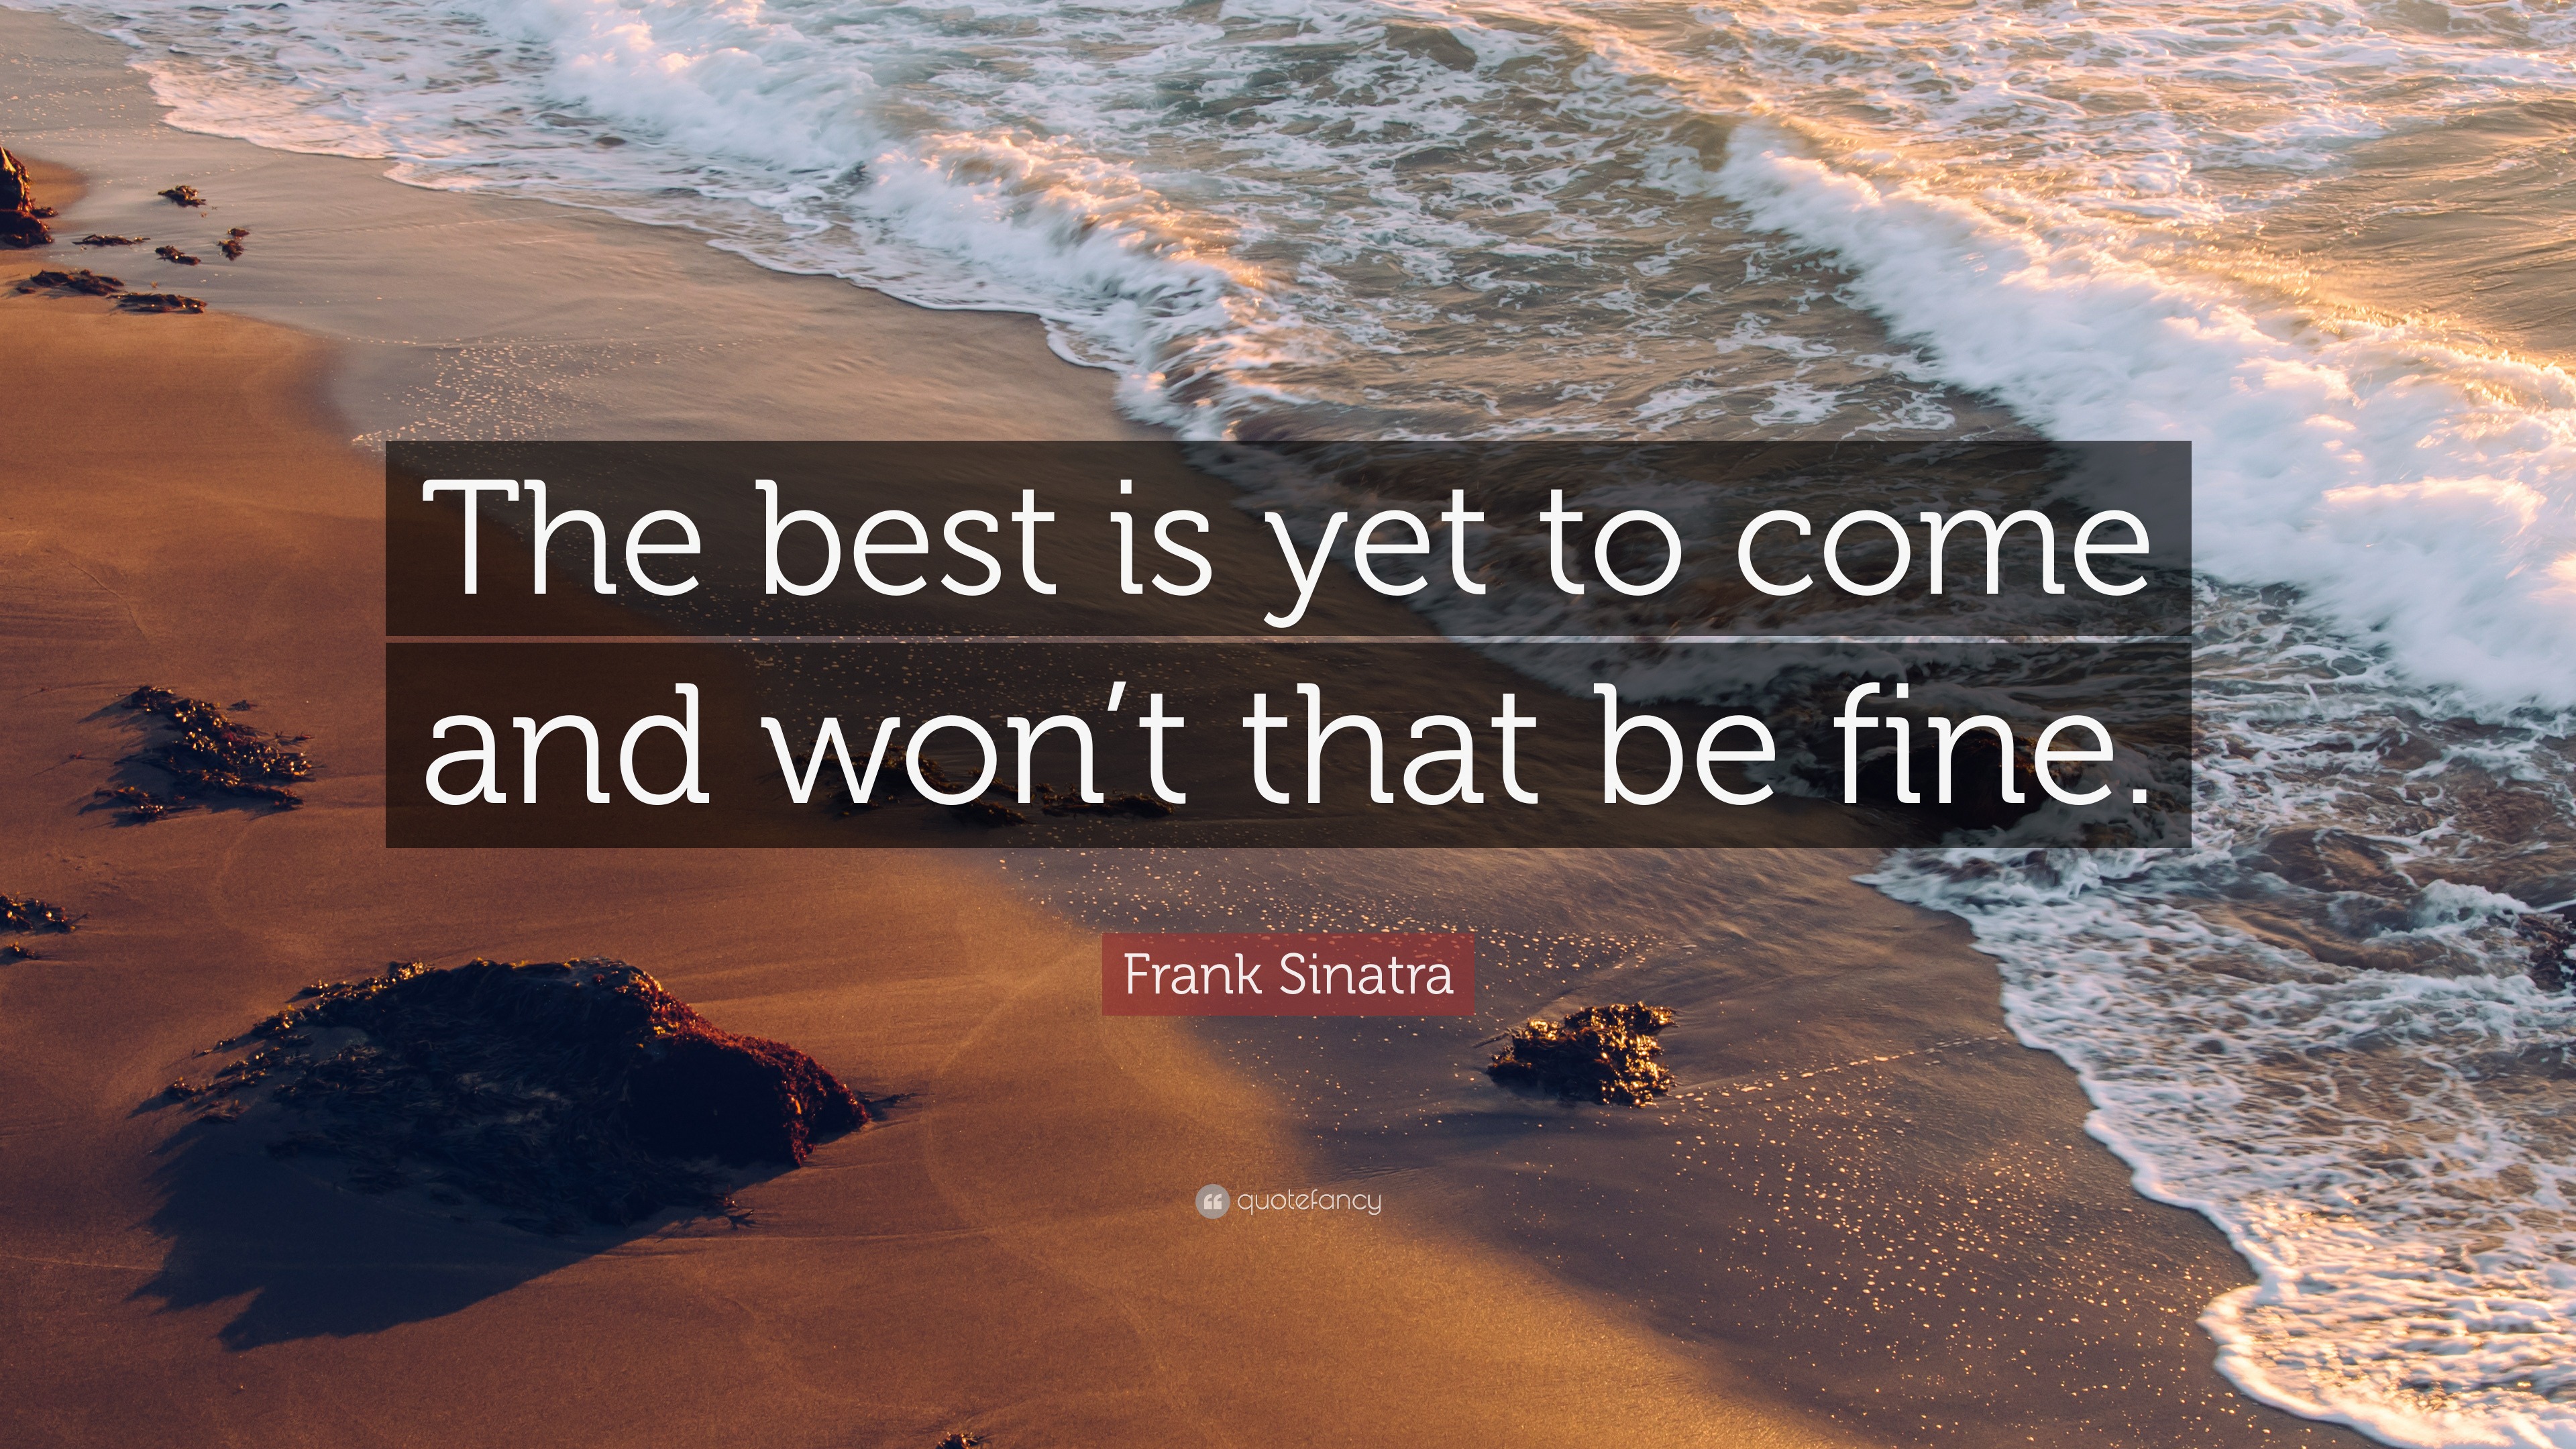 Frank Sinatra Quote “The best is yet to come and won’t that be fine